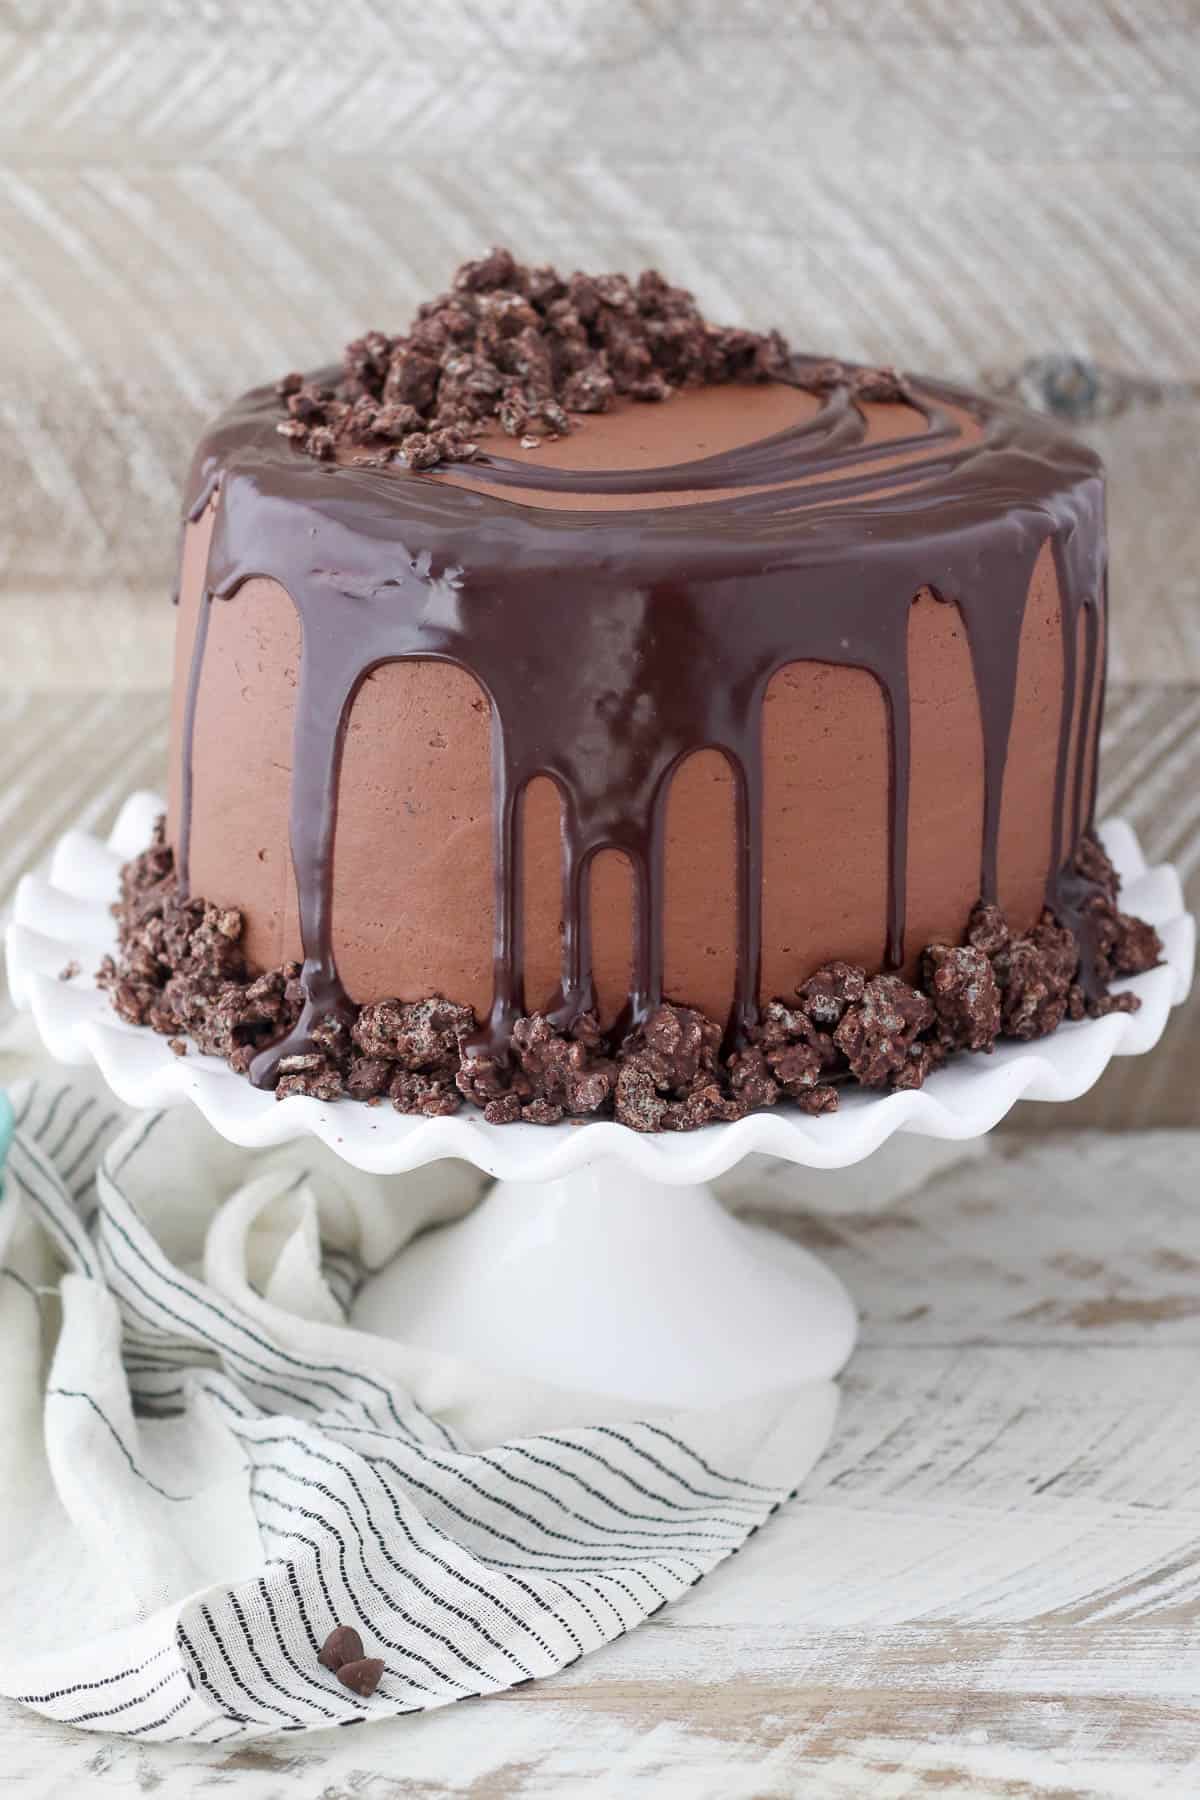 A frosted French Silk chocolate cake topped with a ganache drip on a cake stand.